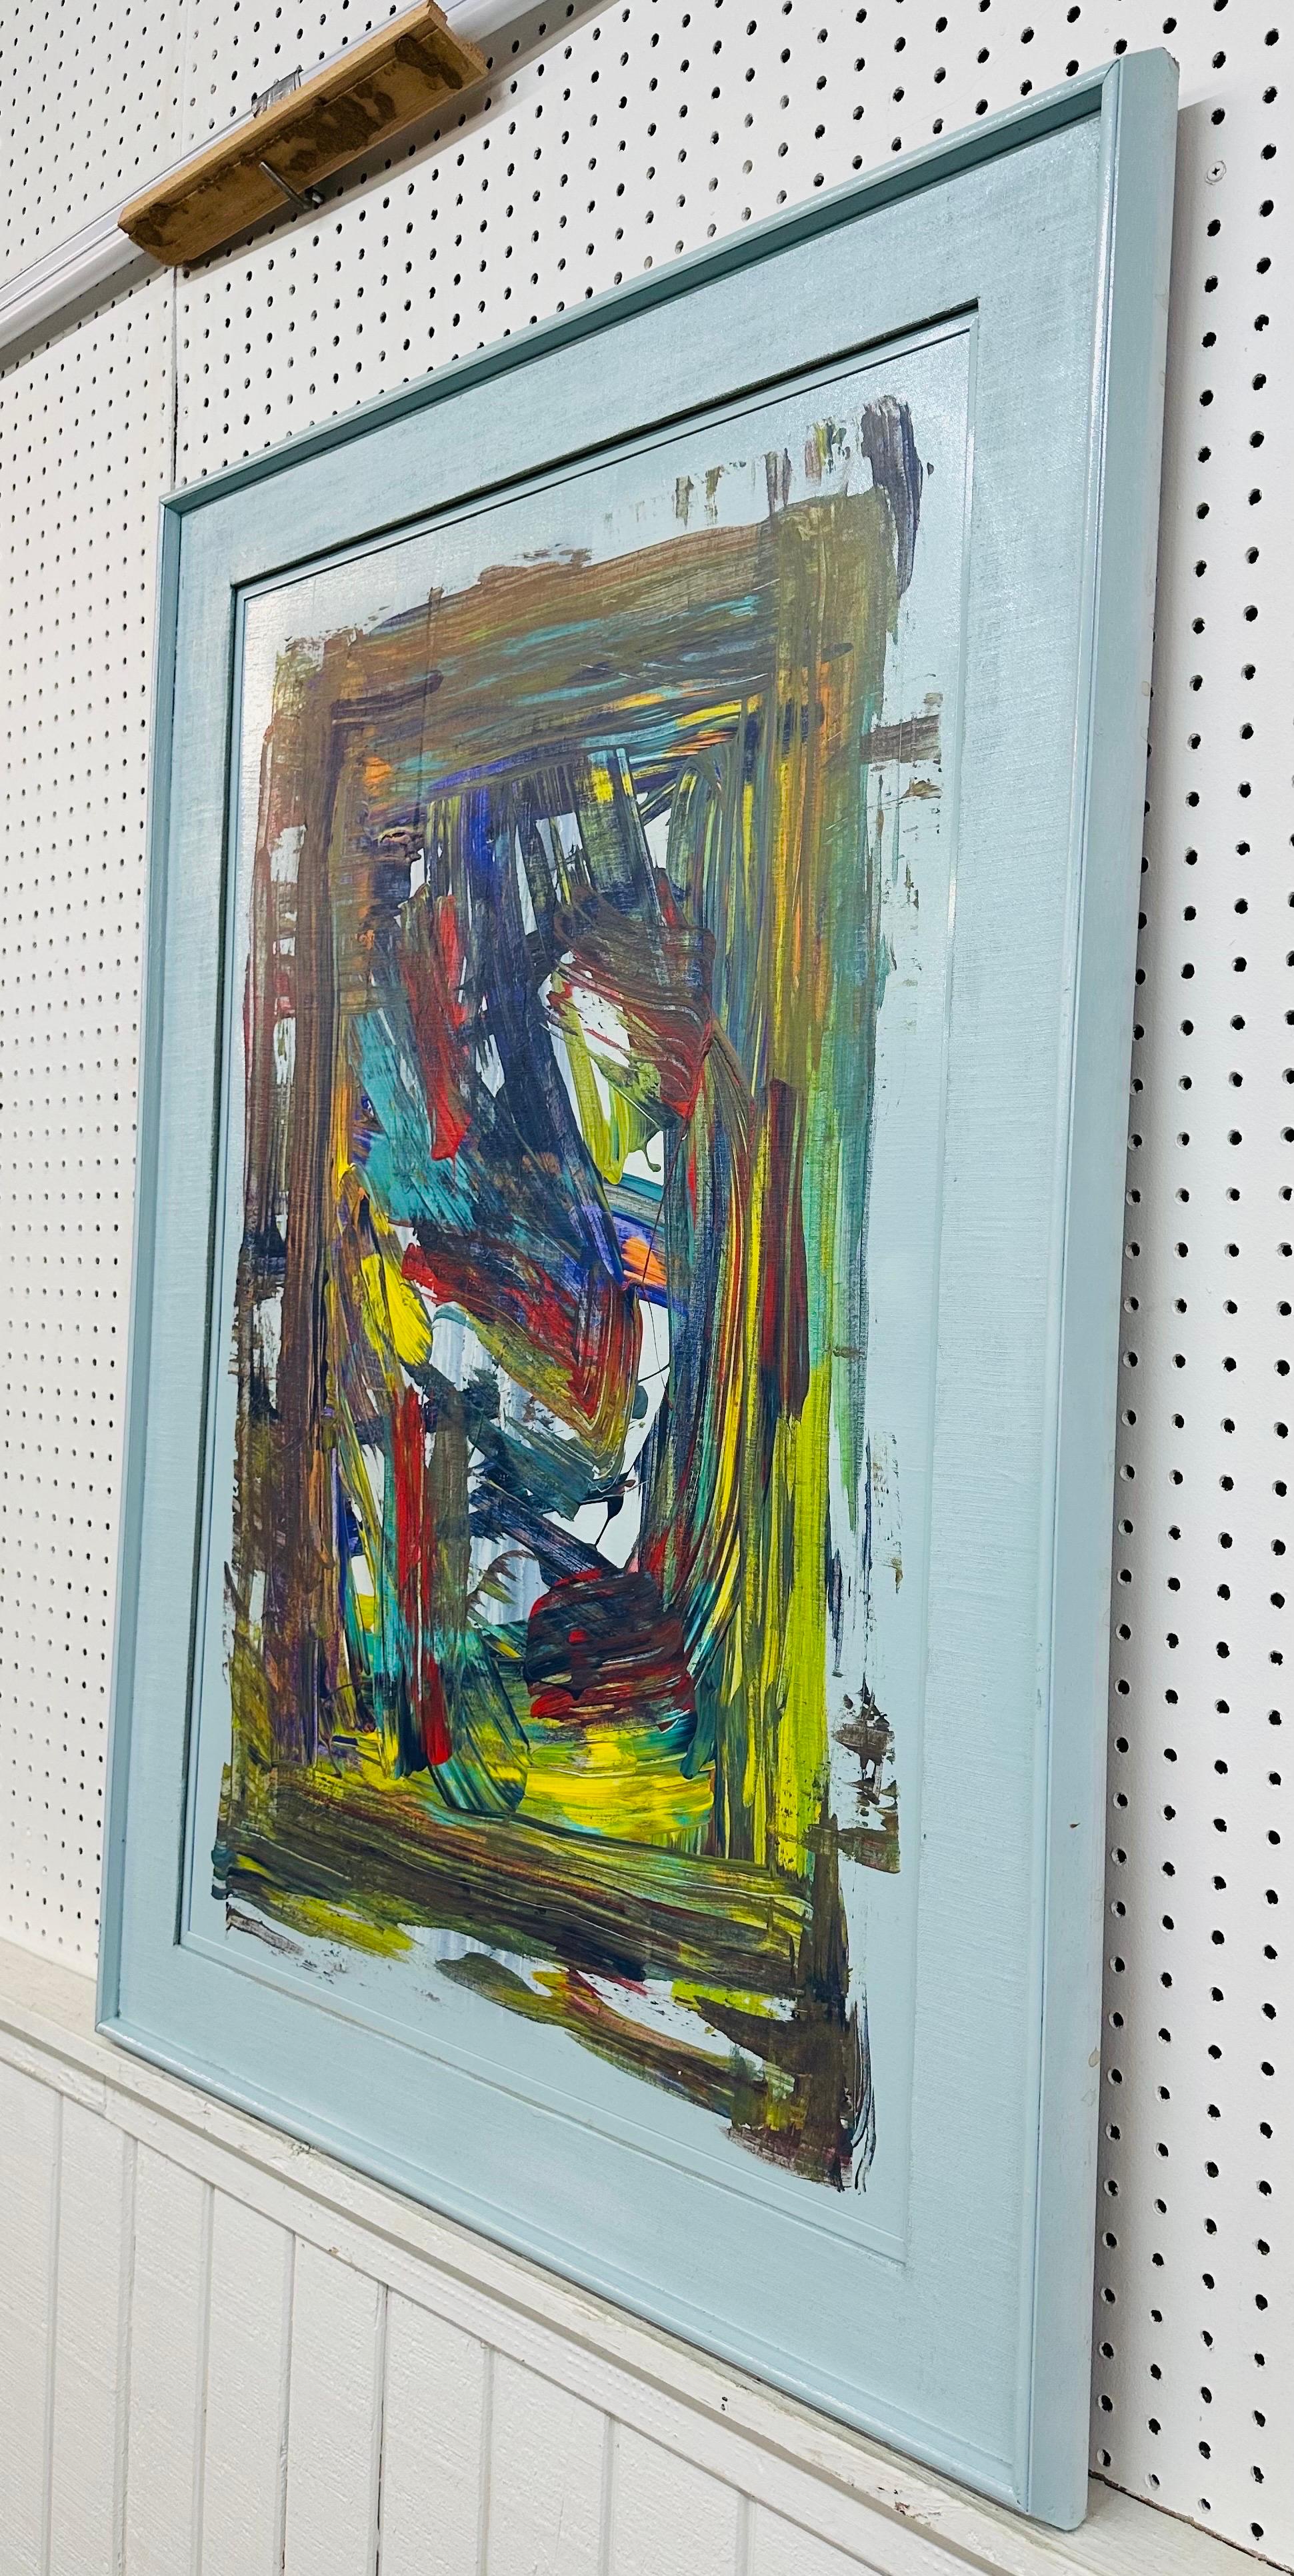 This listing is for a Modern Expressionist Abstract Painting. Featuring a vintage wood frame, original expressionist style abstract art with a mixture of colors, and a wire on the back for hanging. This is an exceptional piece by artist Mullin.